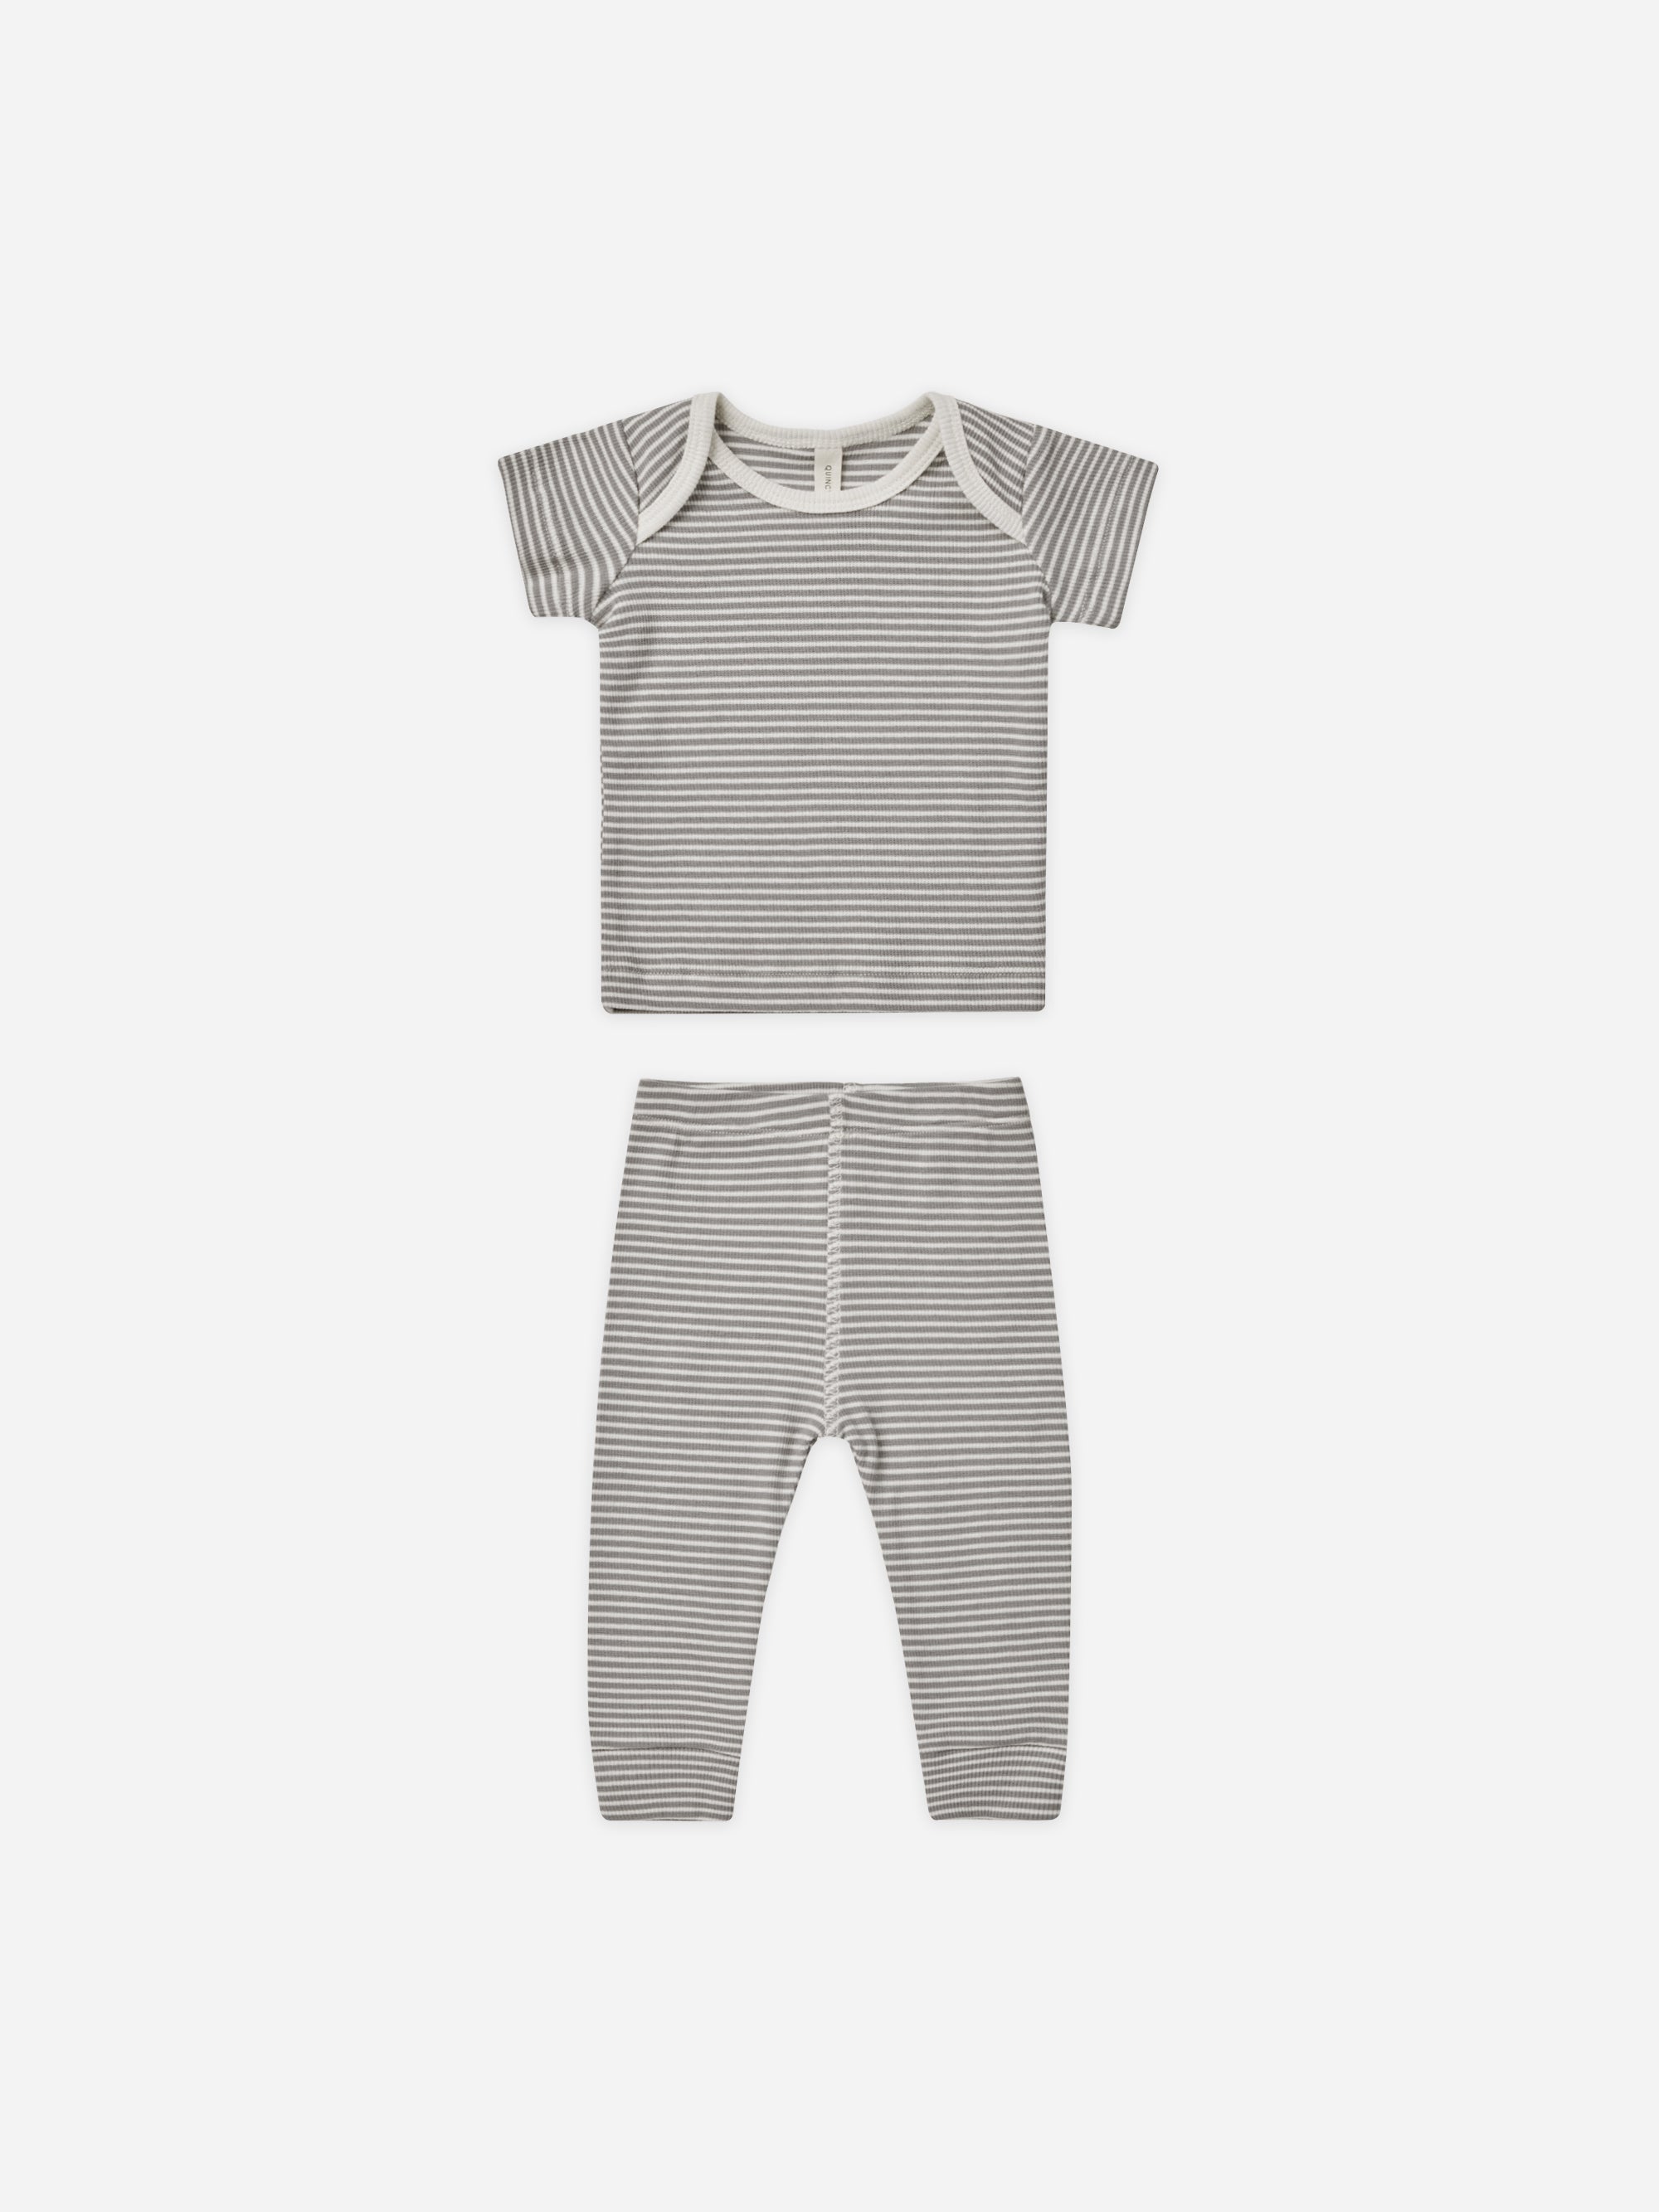 Ribbed Short Sleeve Tee + Legging Set || Lagoon Micro Stripe - Rylee + Cru | Kids Clothes | Trendy Baby Clothes | Modern Infant Outfits |